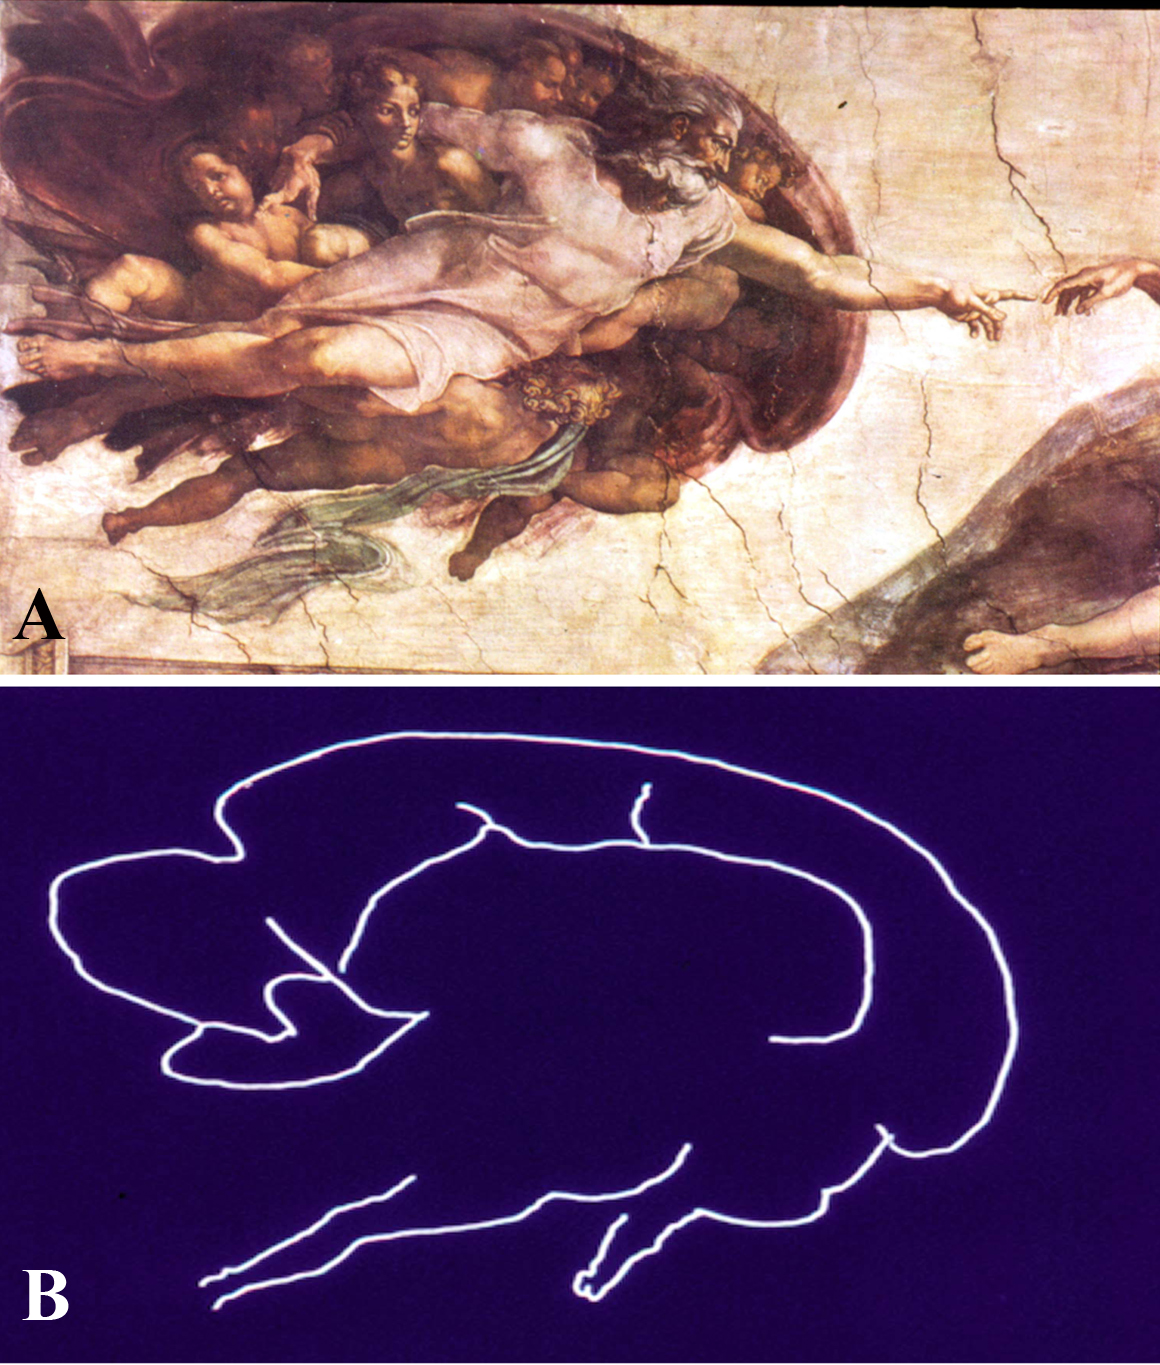 Fig. 4. Detail from the fresco, “Creation of Adam,” by Michelangelo Buonarroti, visible on the ceiling of the Sistine Chapel in the Vatican at Rome, Italy, painted between 1508-1512. (A) Photograph of the fresco showing God giving spiritual life and intellect to Adam through his touch; (B) The contour of the same image is reminiscent of a midline saggital section of the brain and includes the hypothalamus, pituitary and brainstem. (From Toni R, Malaguti A, Benfenati F, Martini L: The human hypothalamus: a morphofunctional perspective. J Endocrinol Invest 27 (supp to n.6), 73-94, 2004.)